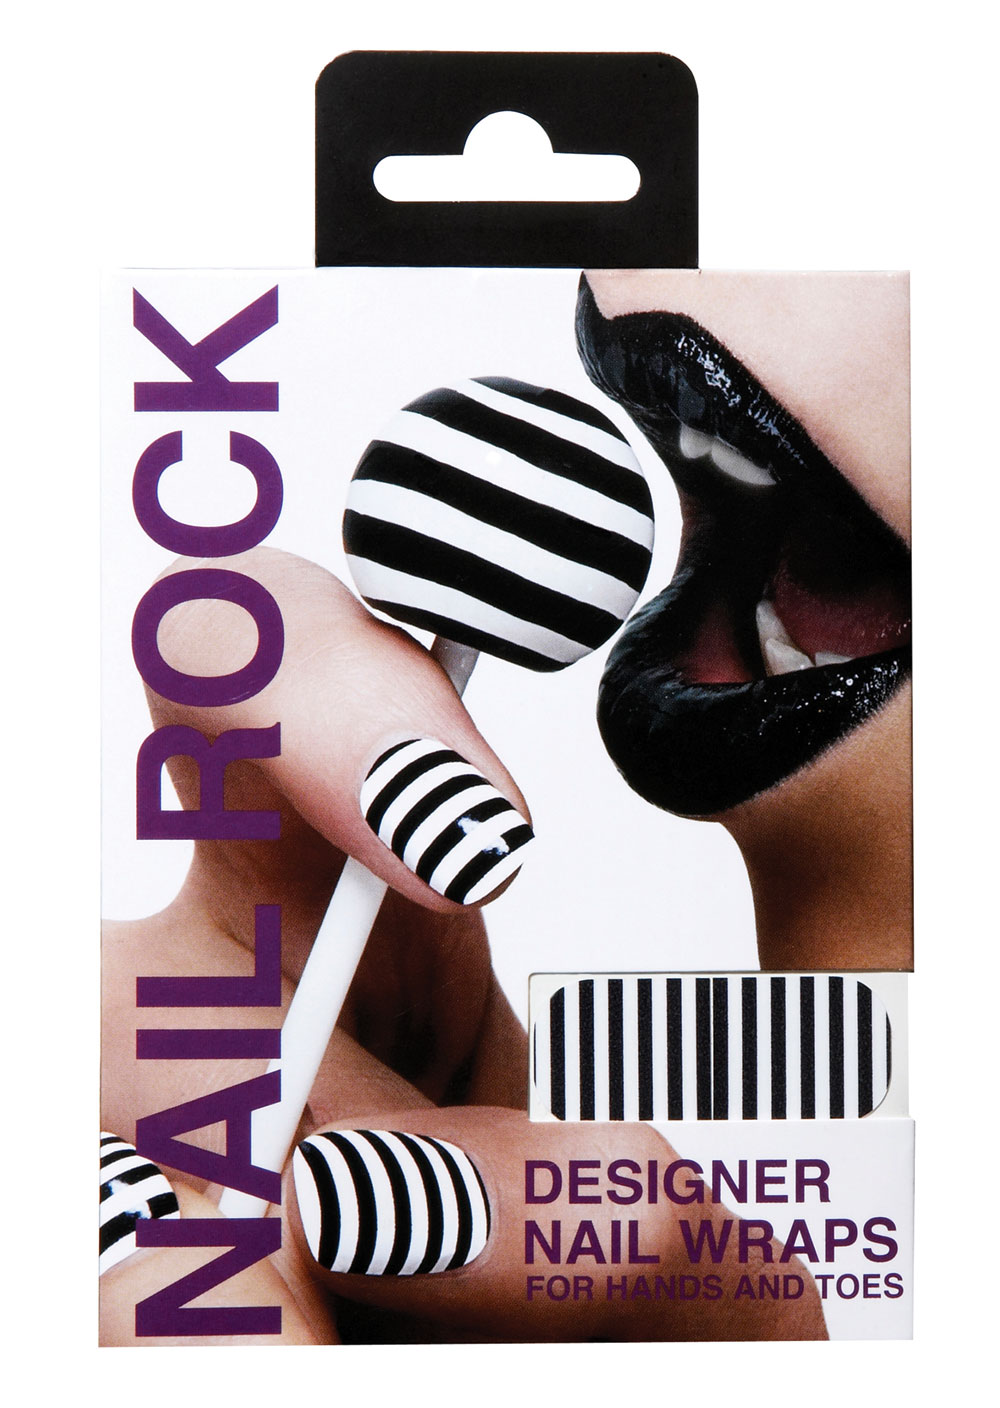 nails wraps from Nail Rock, they are available almost everywhere (Boots,